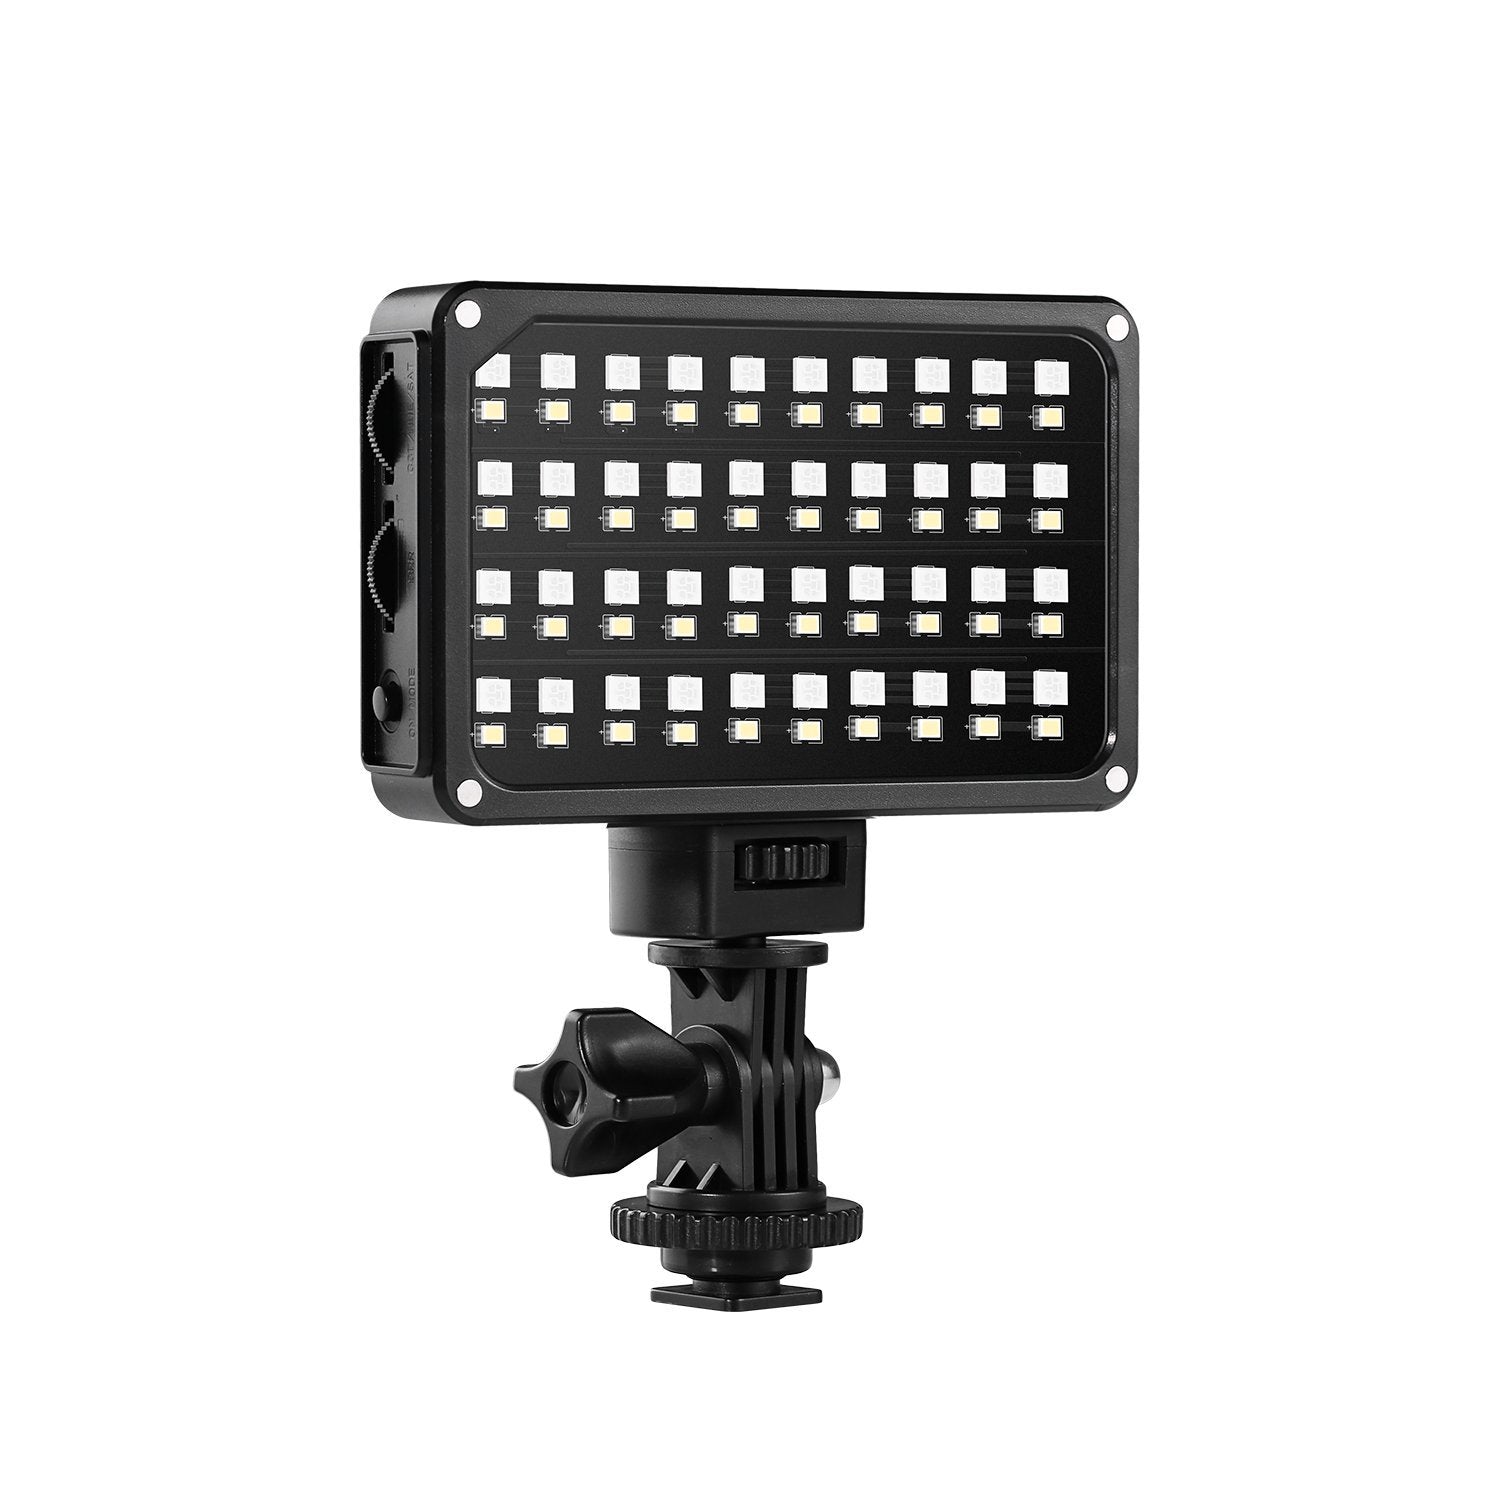 GVM 7S RGB LED On-Camera Video Light with Wi-Fi Control - GVMLED